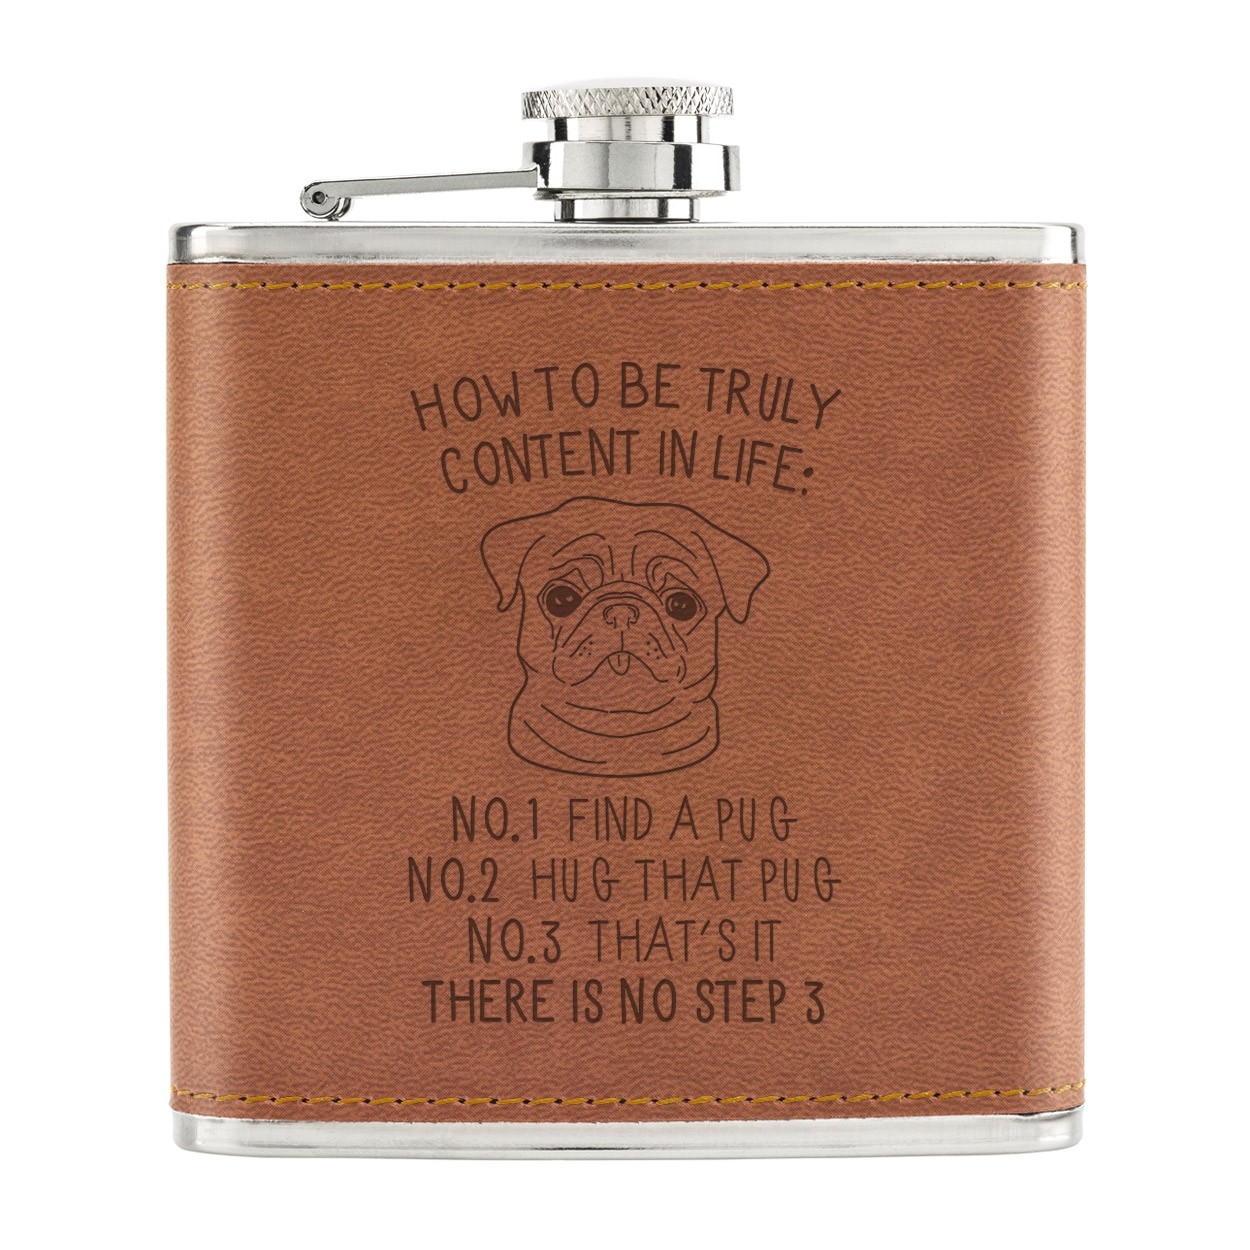 How To Be Truly Content In Life Pug 6oz PU Leather Hip Flask Tan